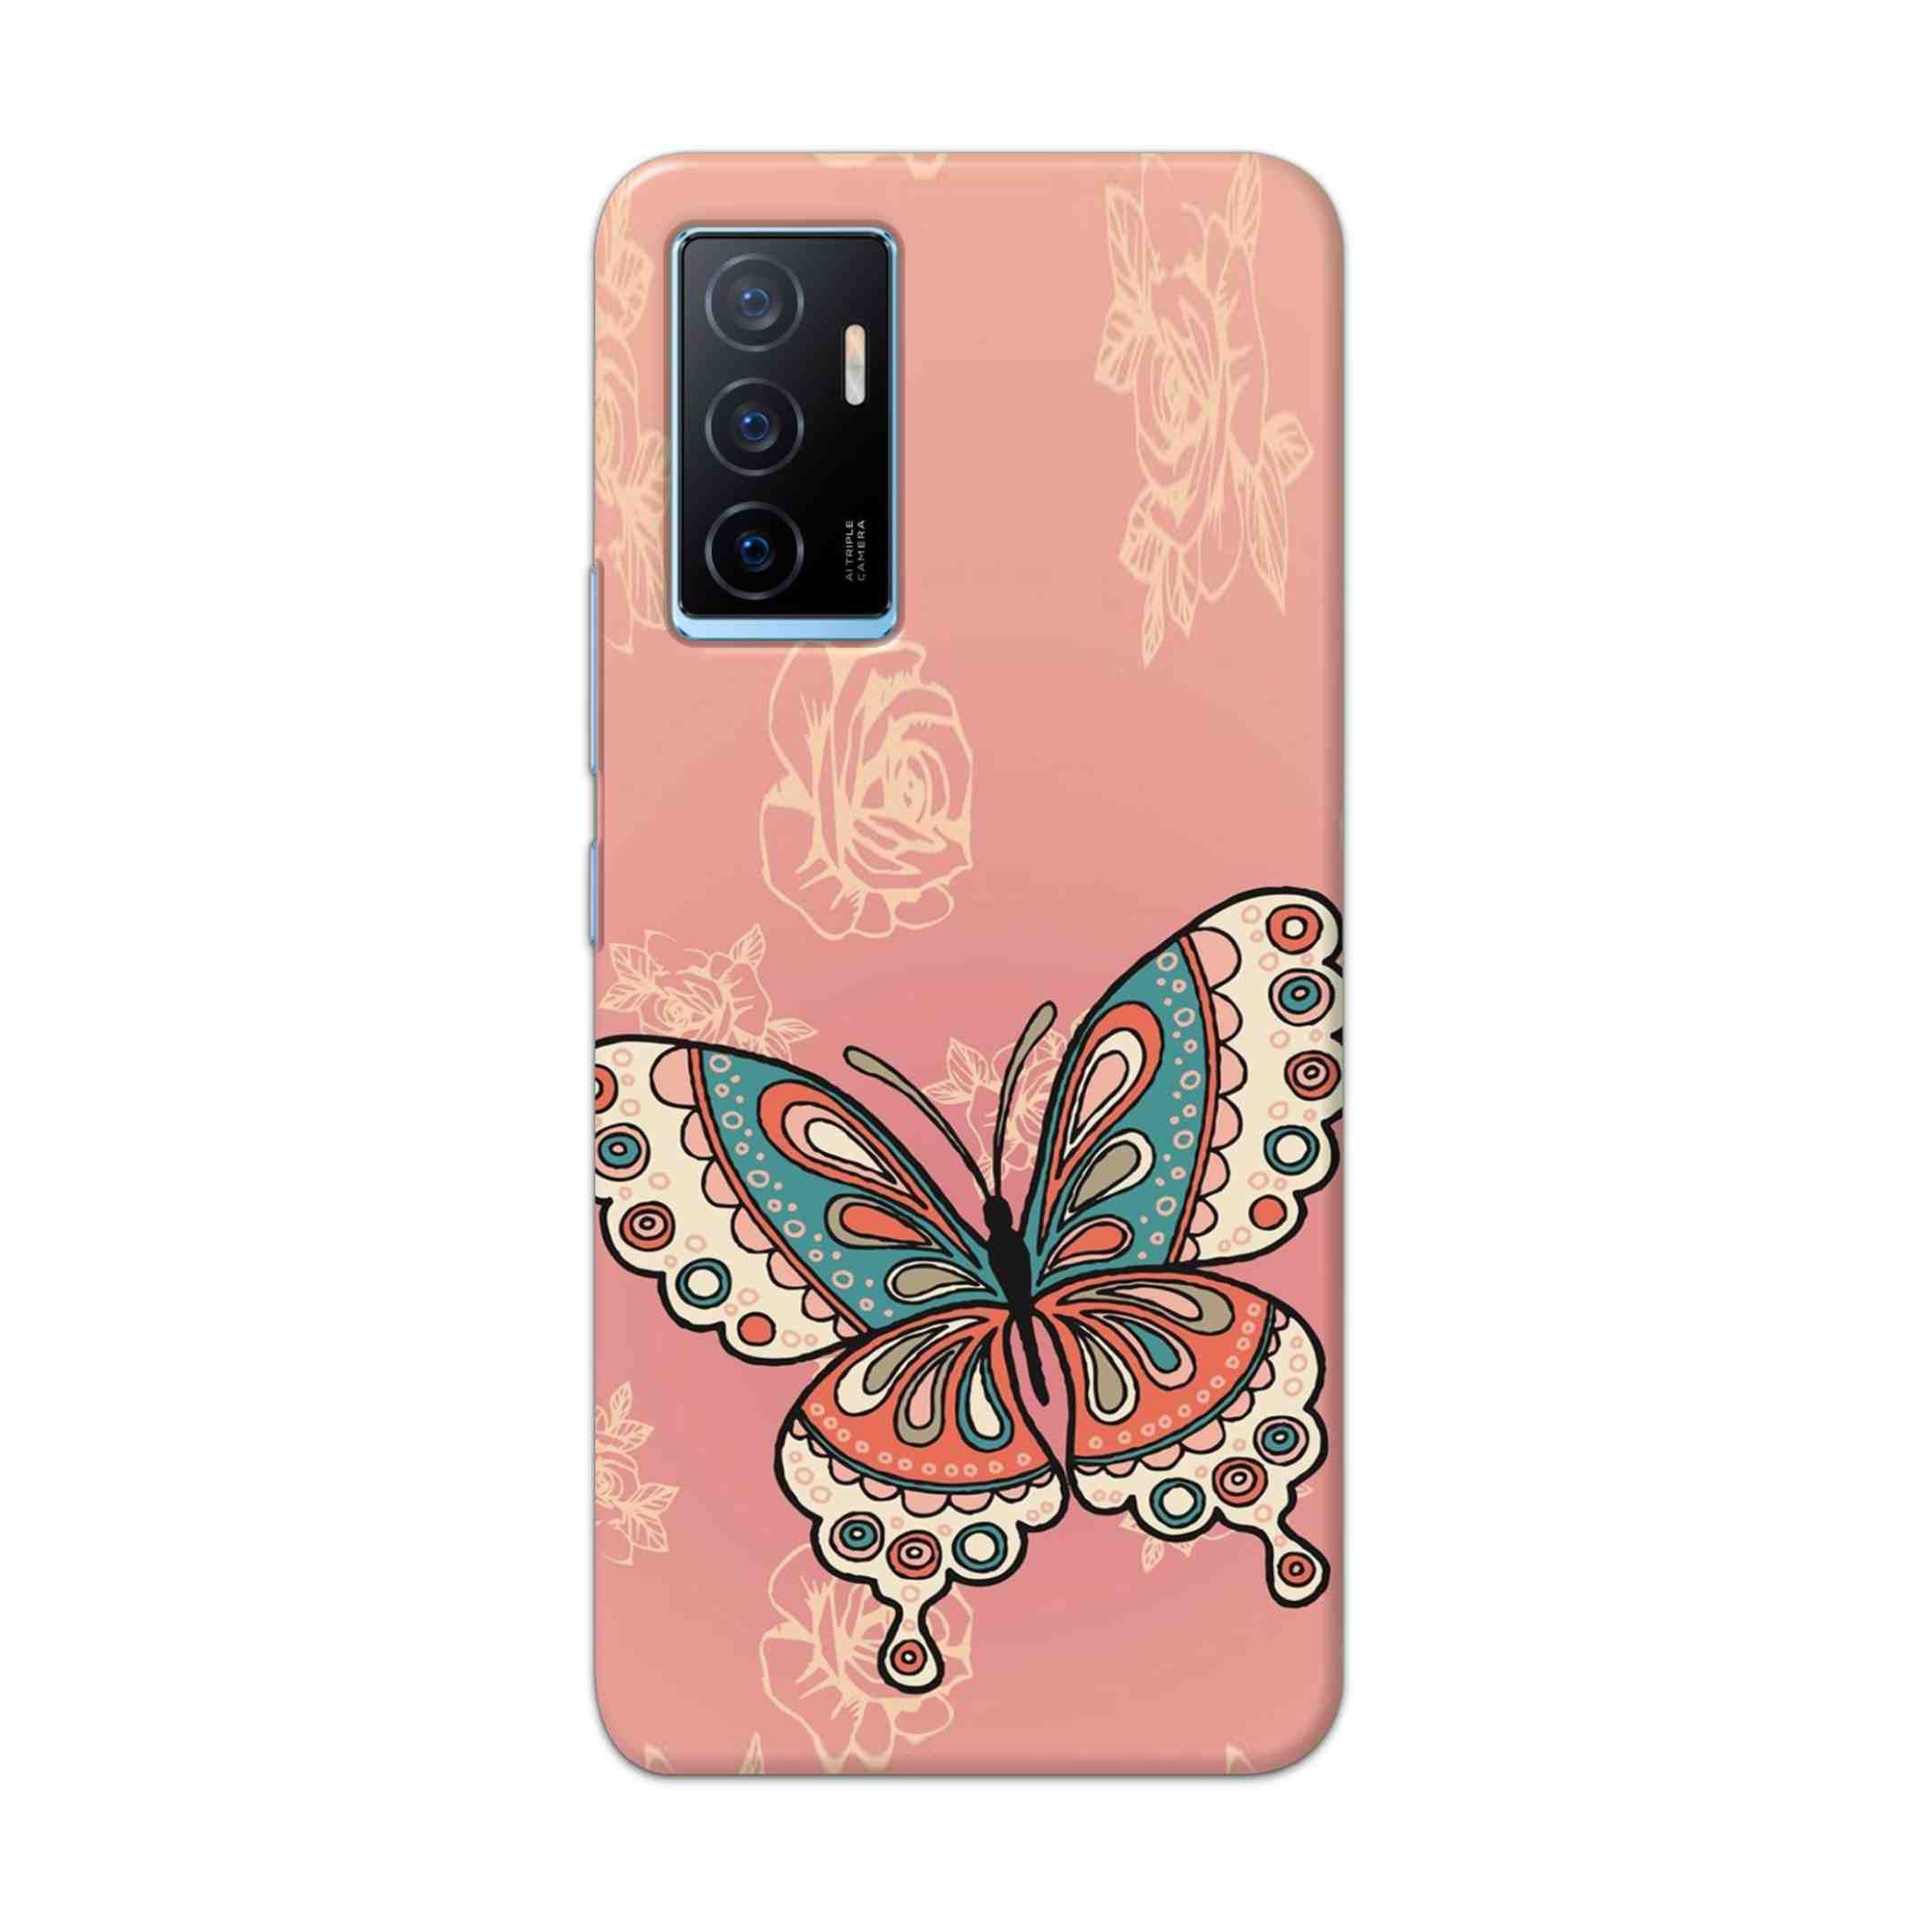 Buy Butterfly Hard Back Mobile Phone Case Cover For Vivo Y75 4G Online